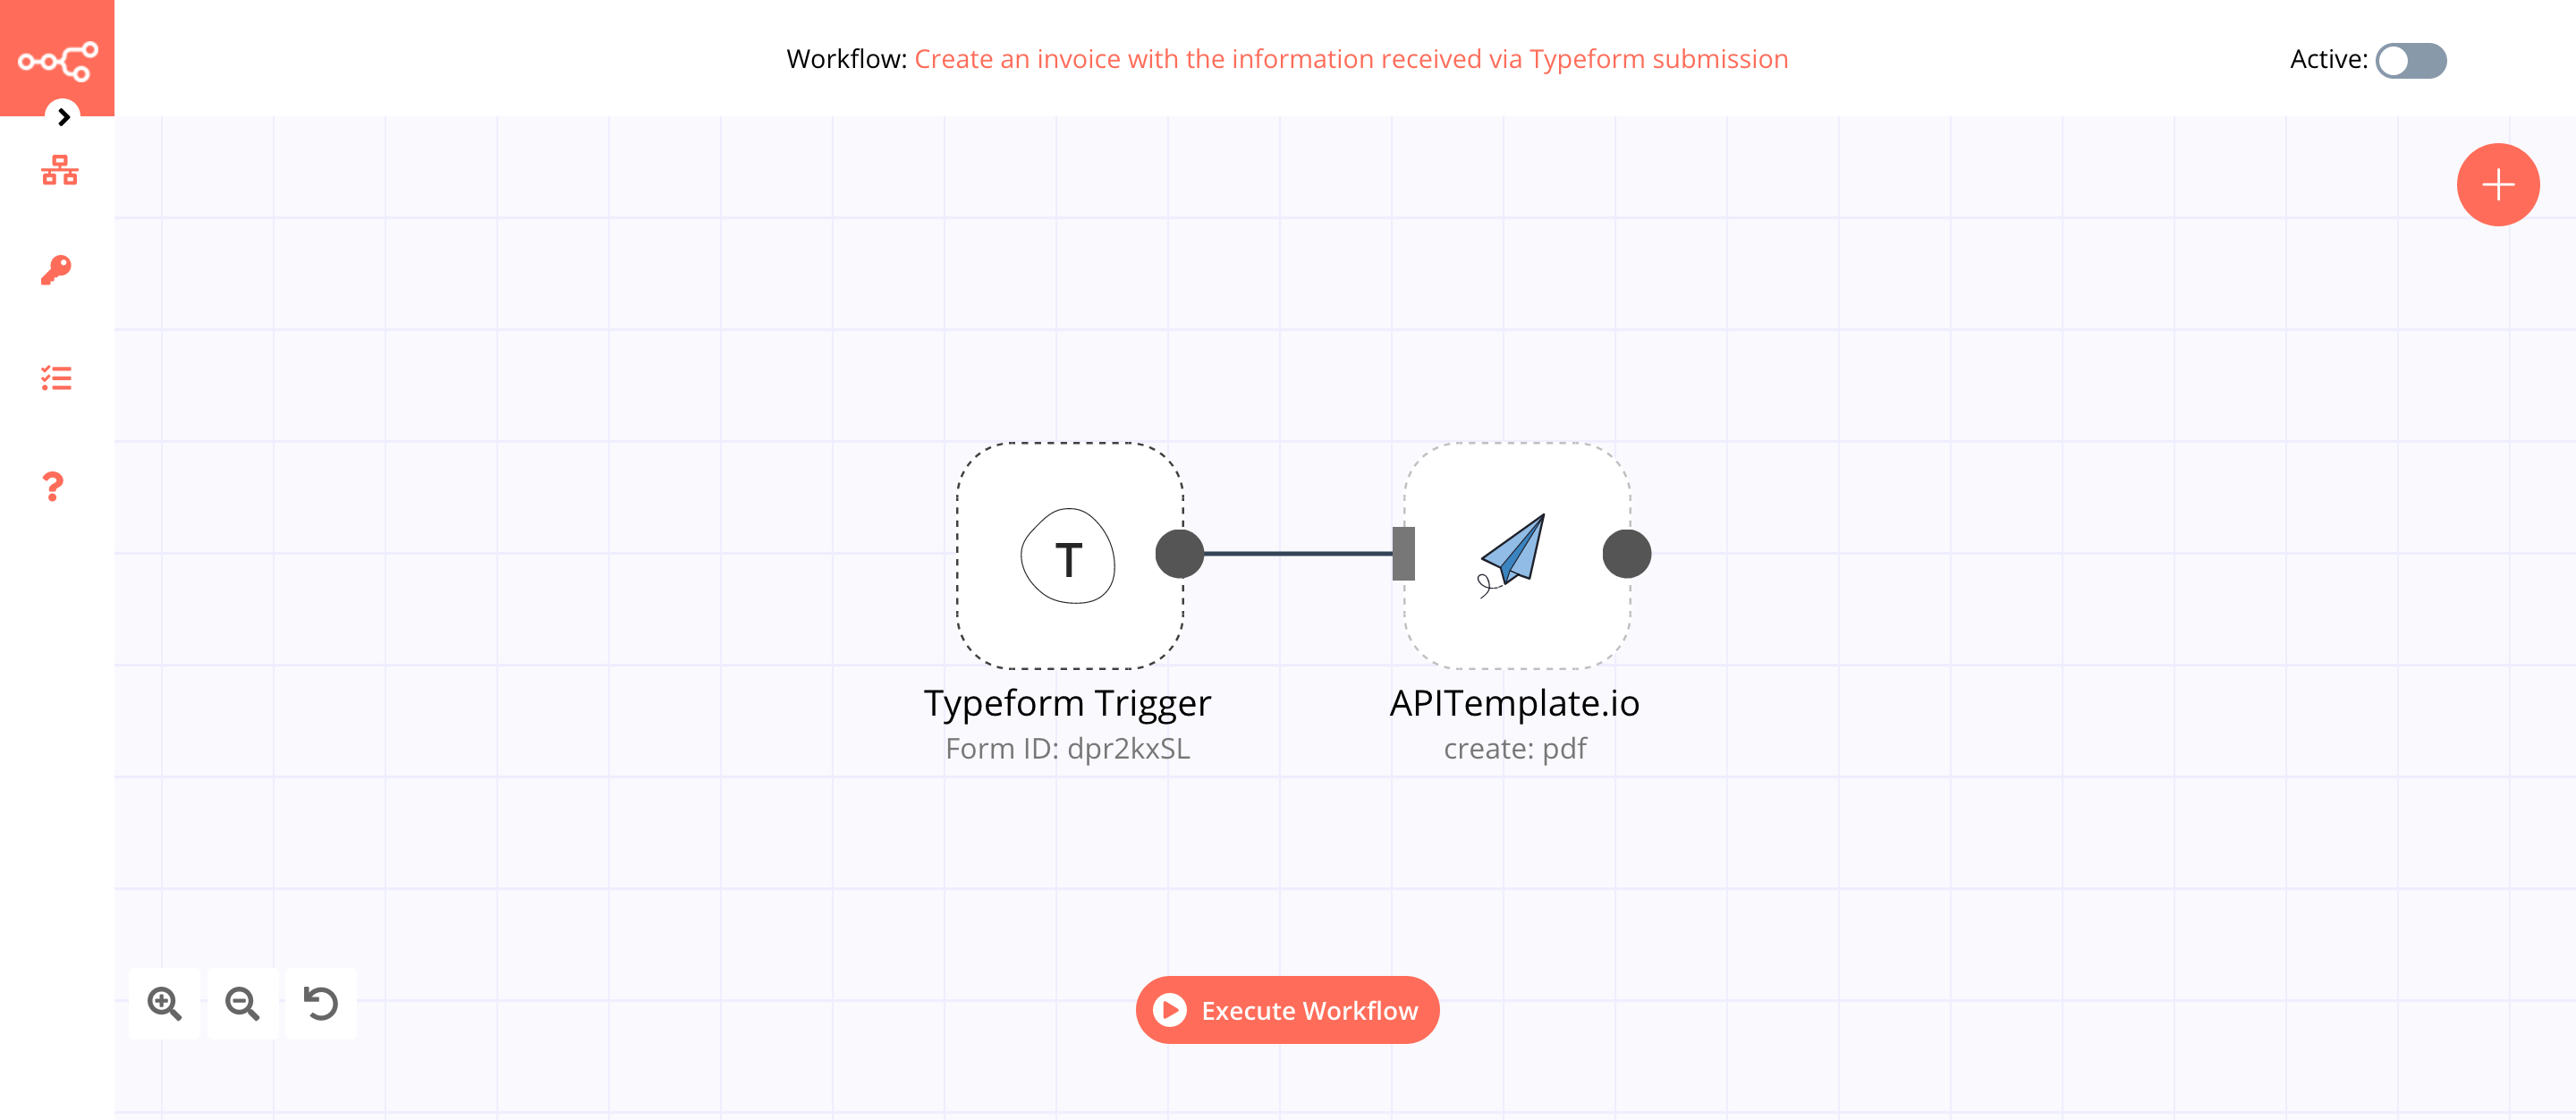 A workflow with the APITemplate.io node